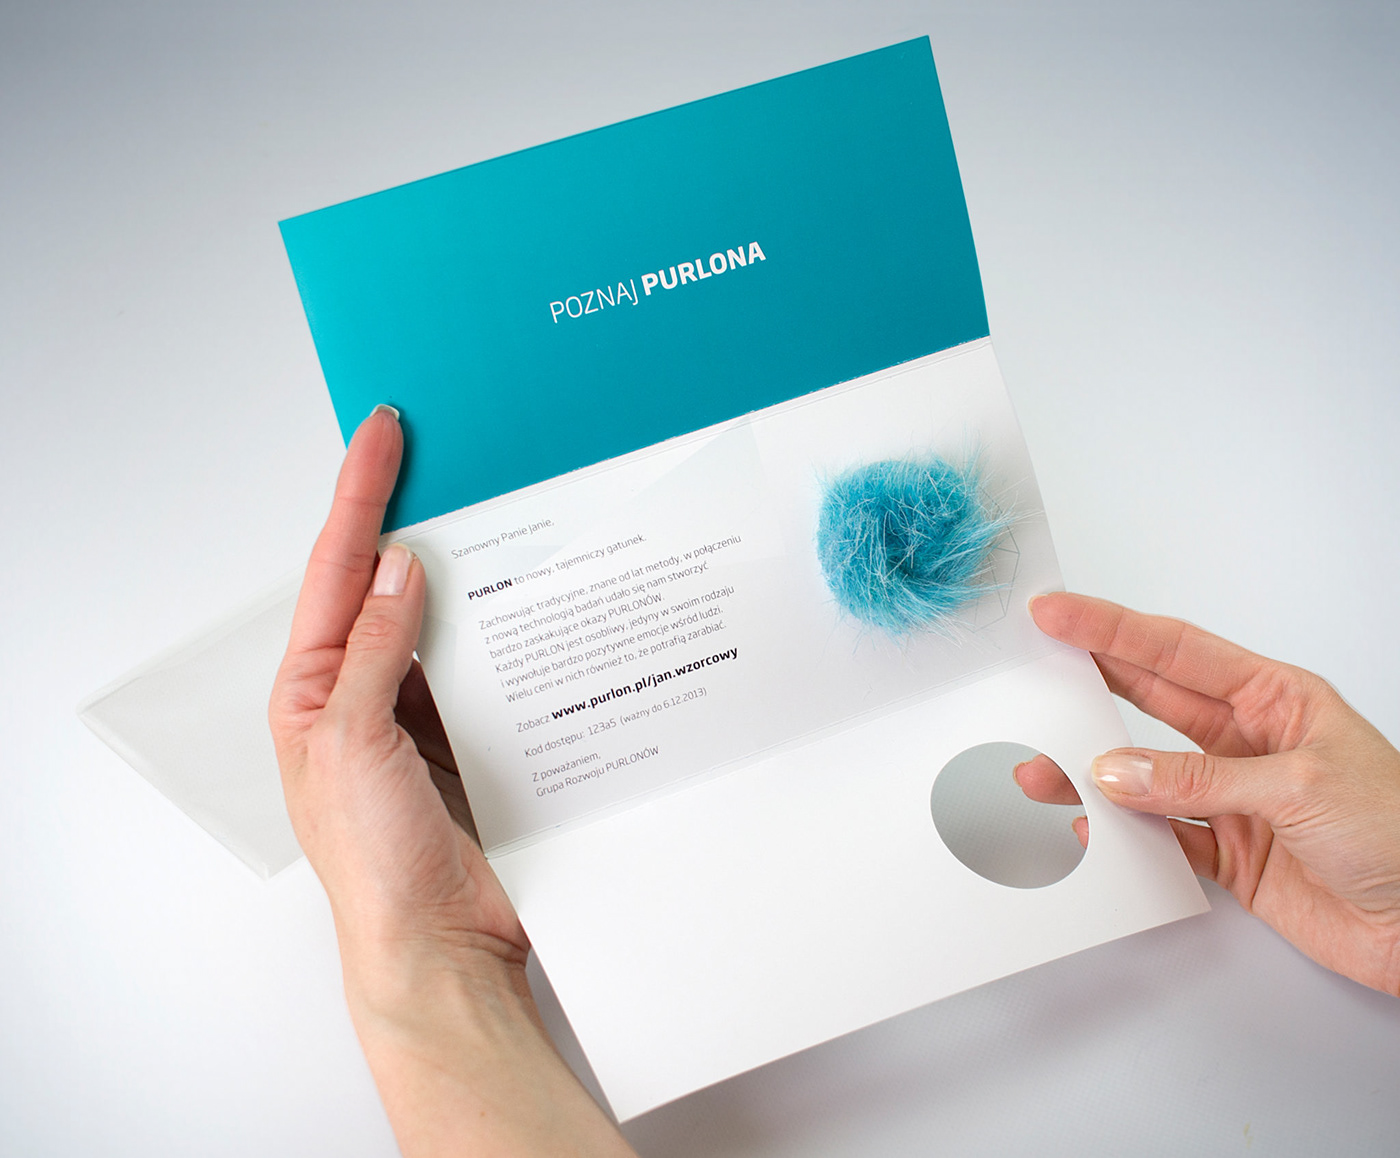 crossmedia Direct mail direct marketing directmail Fur Interaction design  invitation design landing page Packaging personalized campaign pesonalization purl PURLON